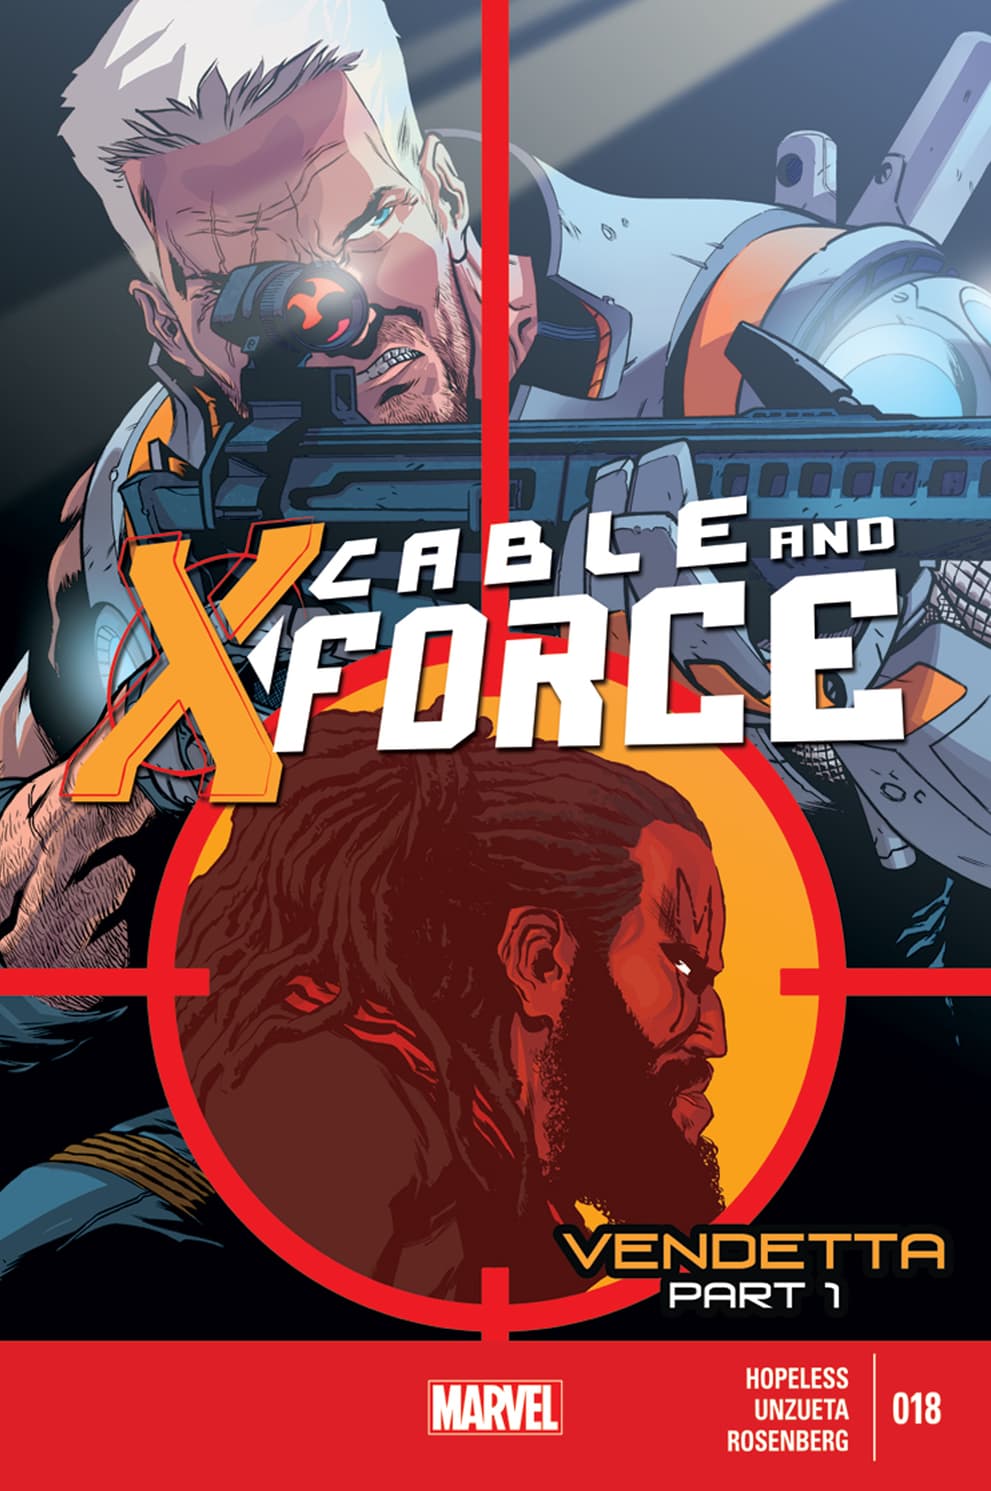 CABLE AND X-FORCE (2012) #18 cover by Ramon Perez and Rachelle Rosenberg